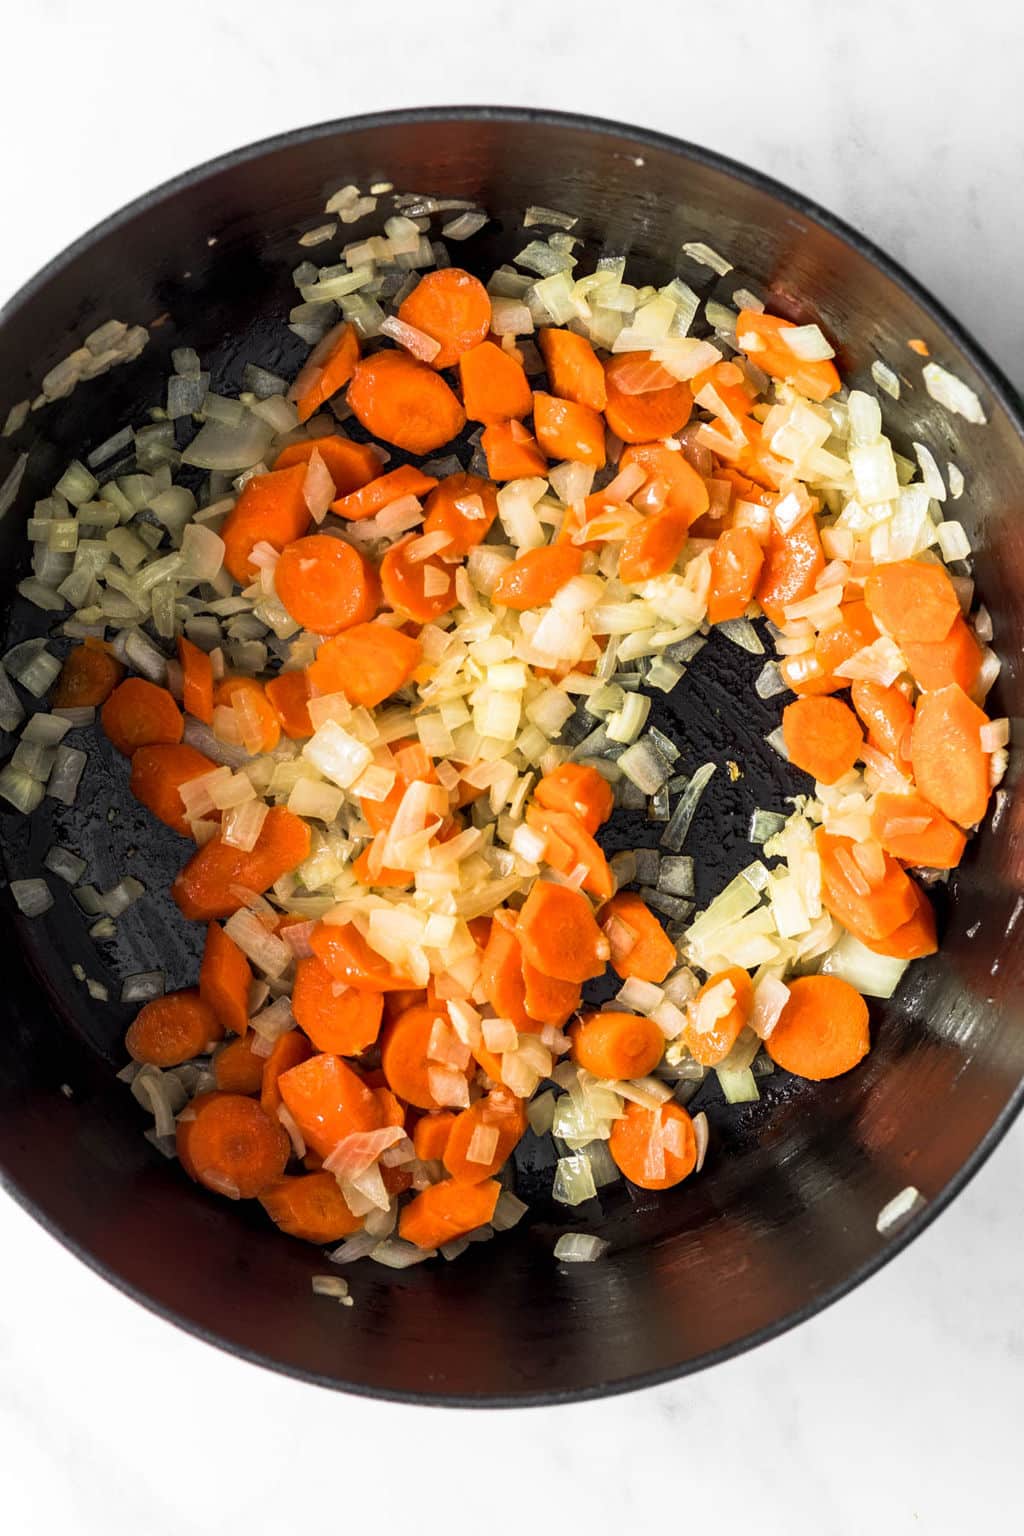 sautéing carrots and onions together in a large black pot.